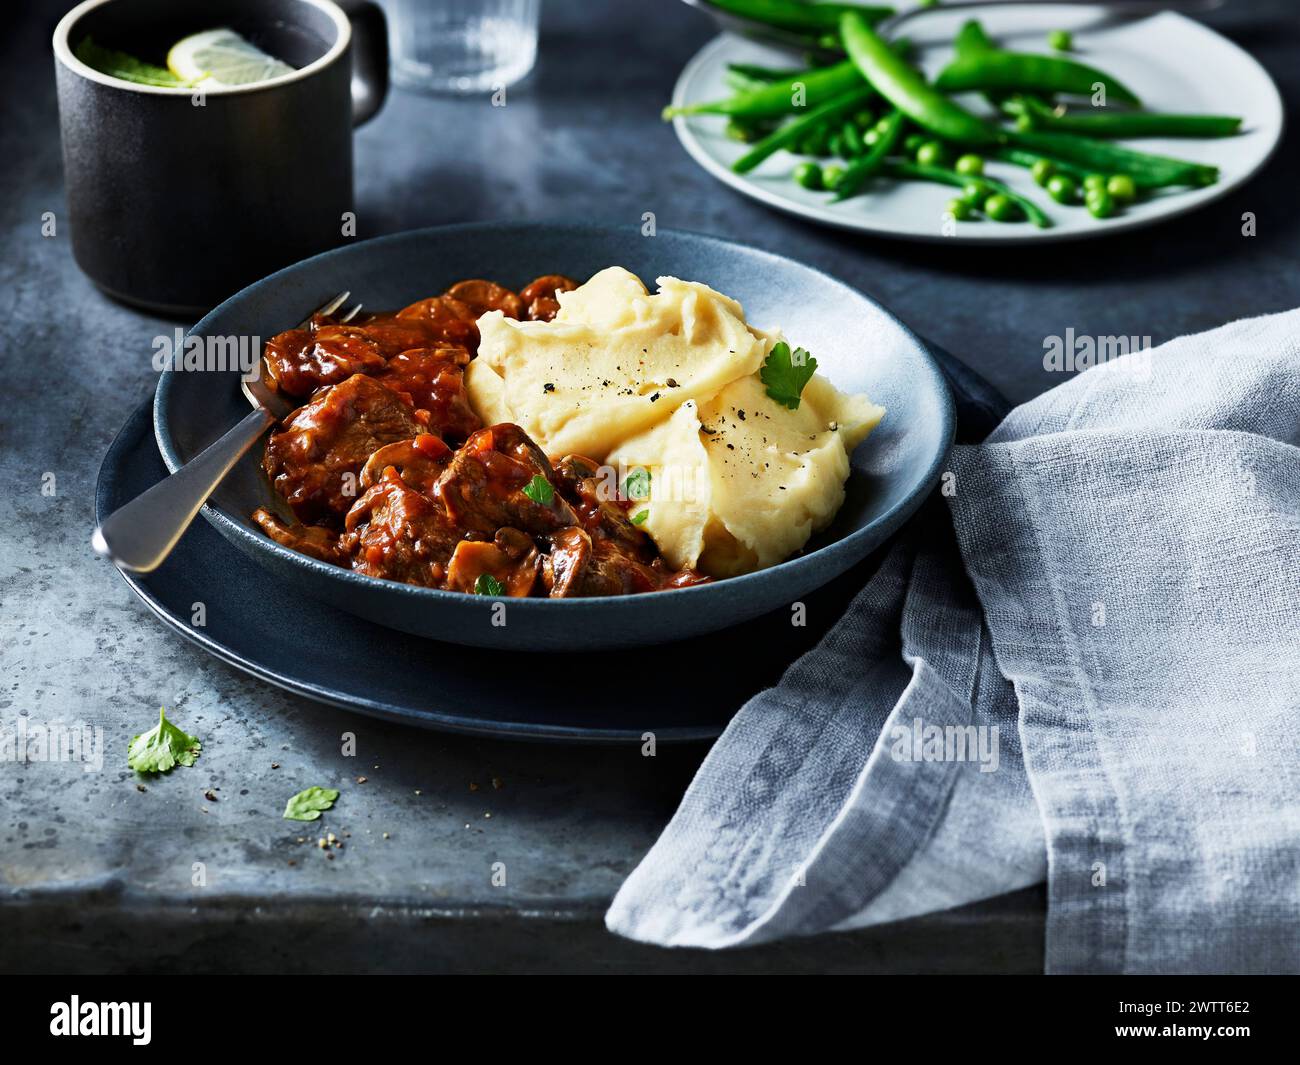 A hearty plate of beef stew with smooth mashed potatoes ready to be enjoyed. Stock Photo